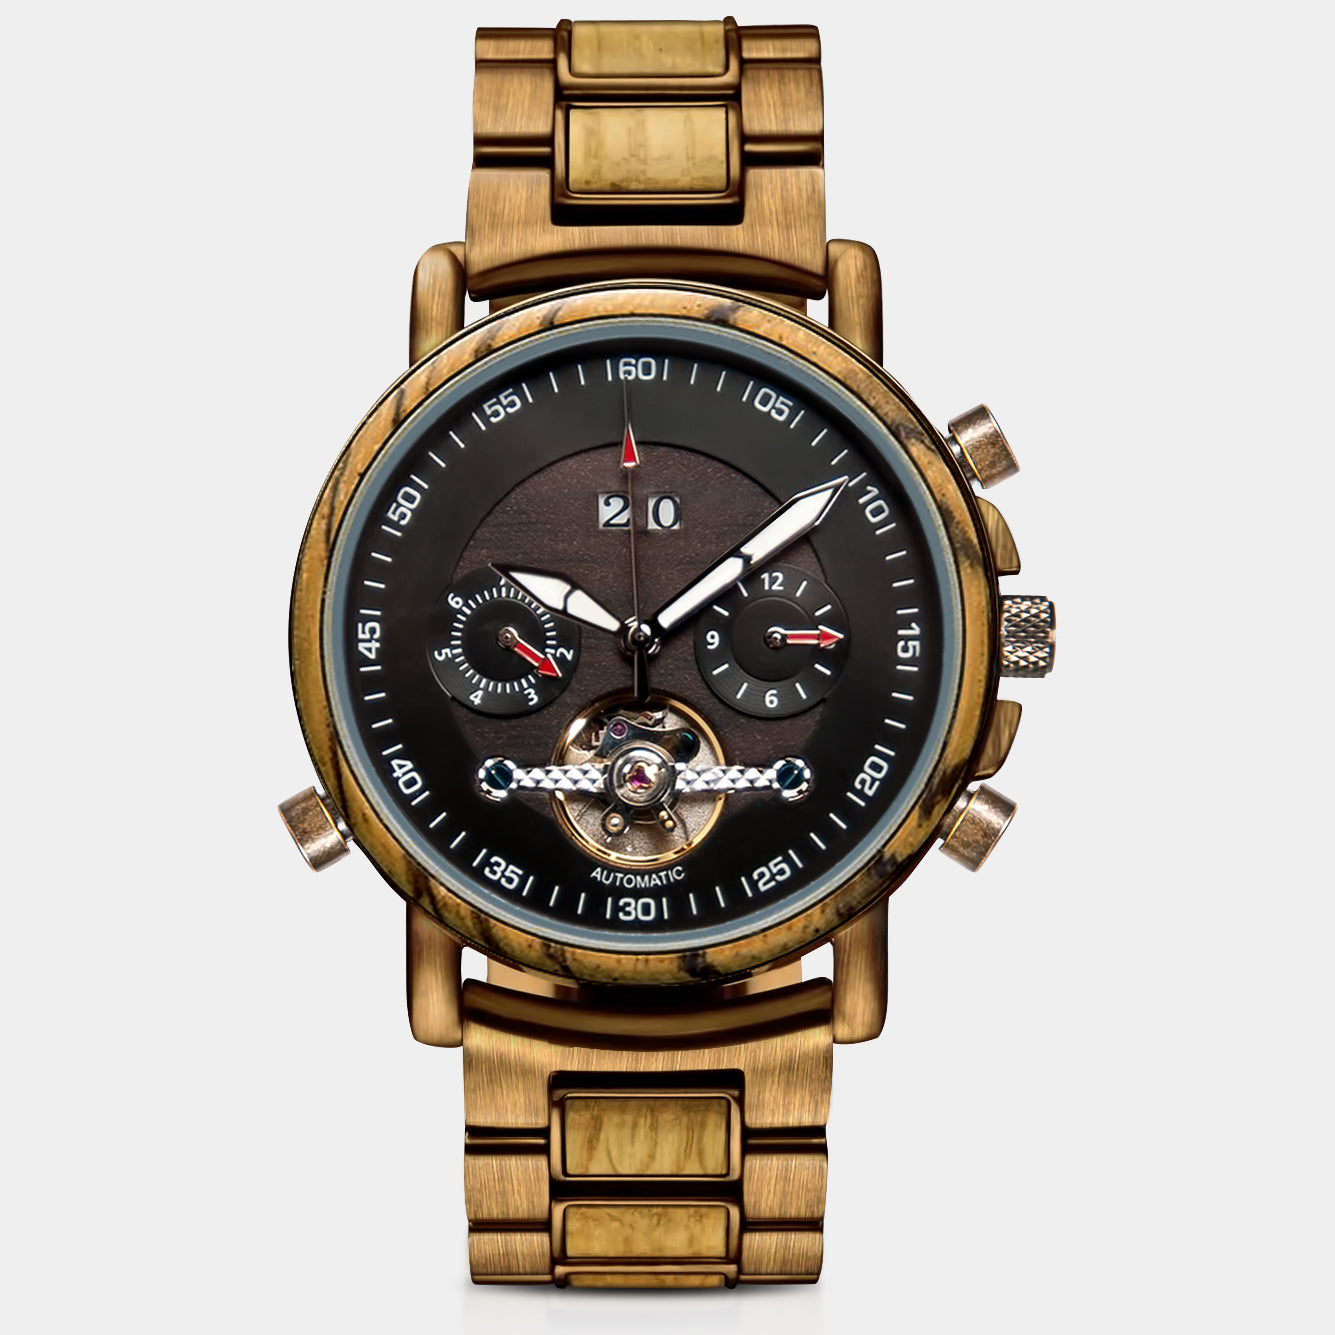 Aldergrove Brushed Bronze Automatic Wood Watch | Custom Mechanical Wood Watch For Men, Engraved In Nature Watches, Custom Personalized Watch For Men, Holiday 2022 Gifts For Men Luxury Wood